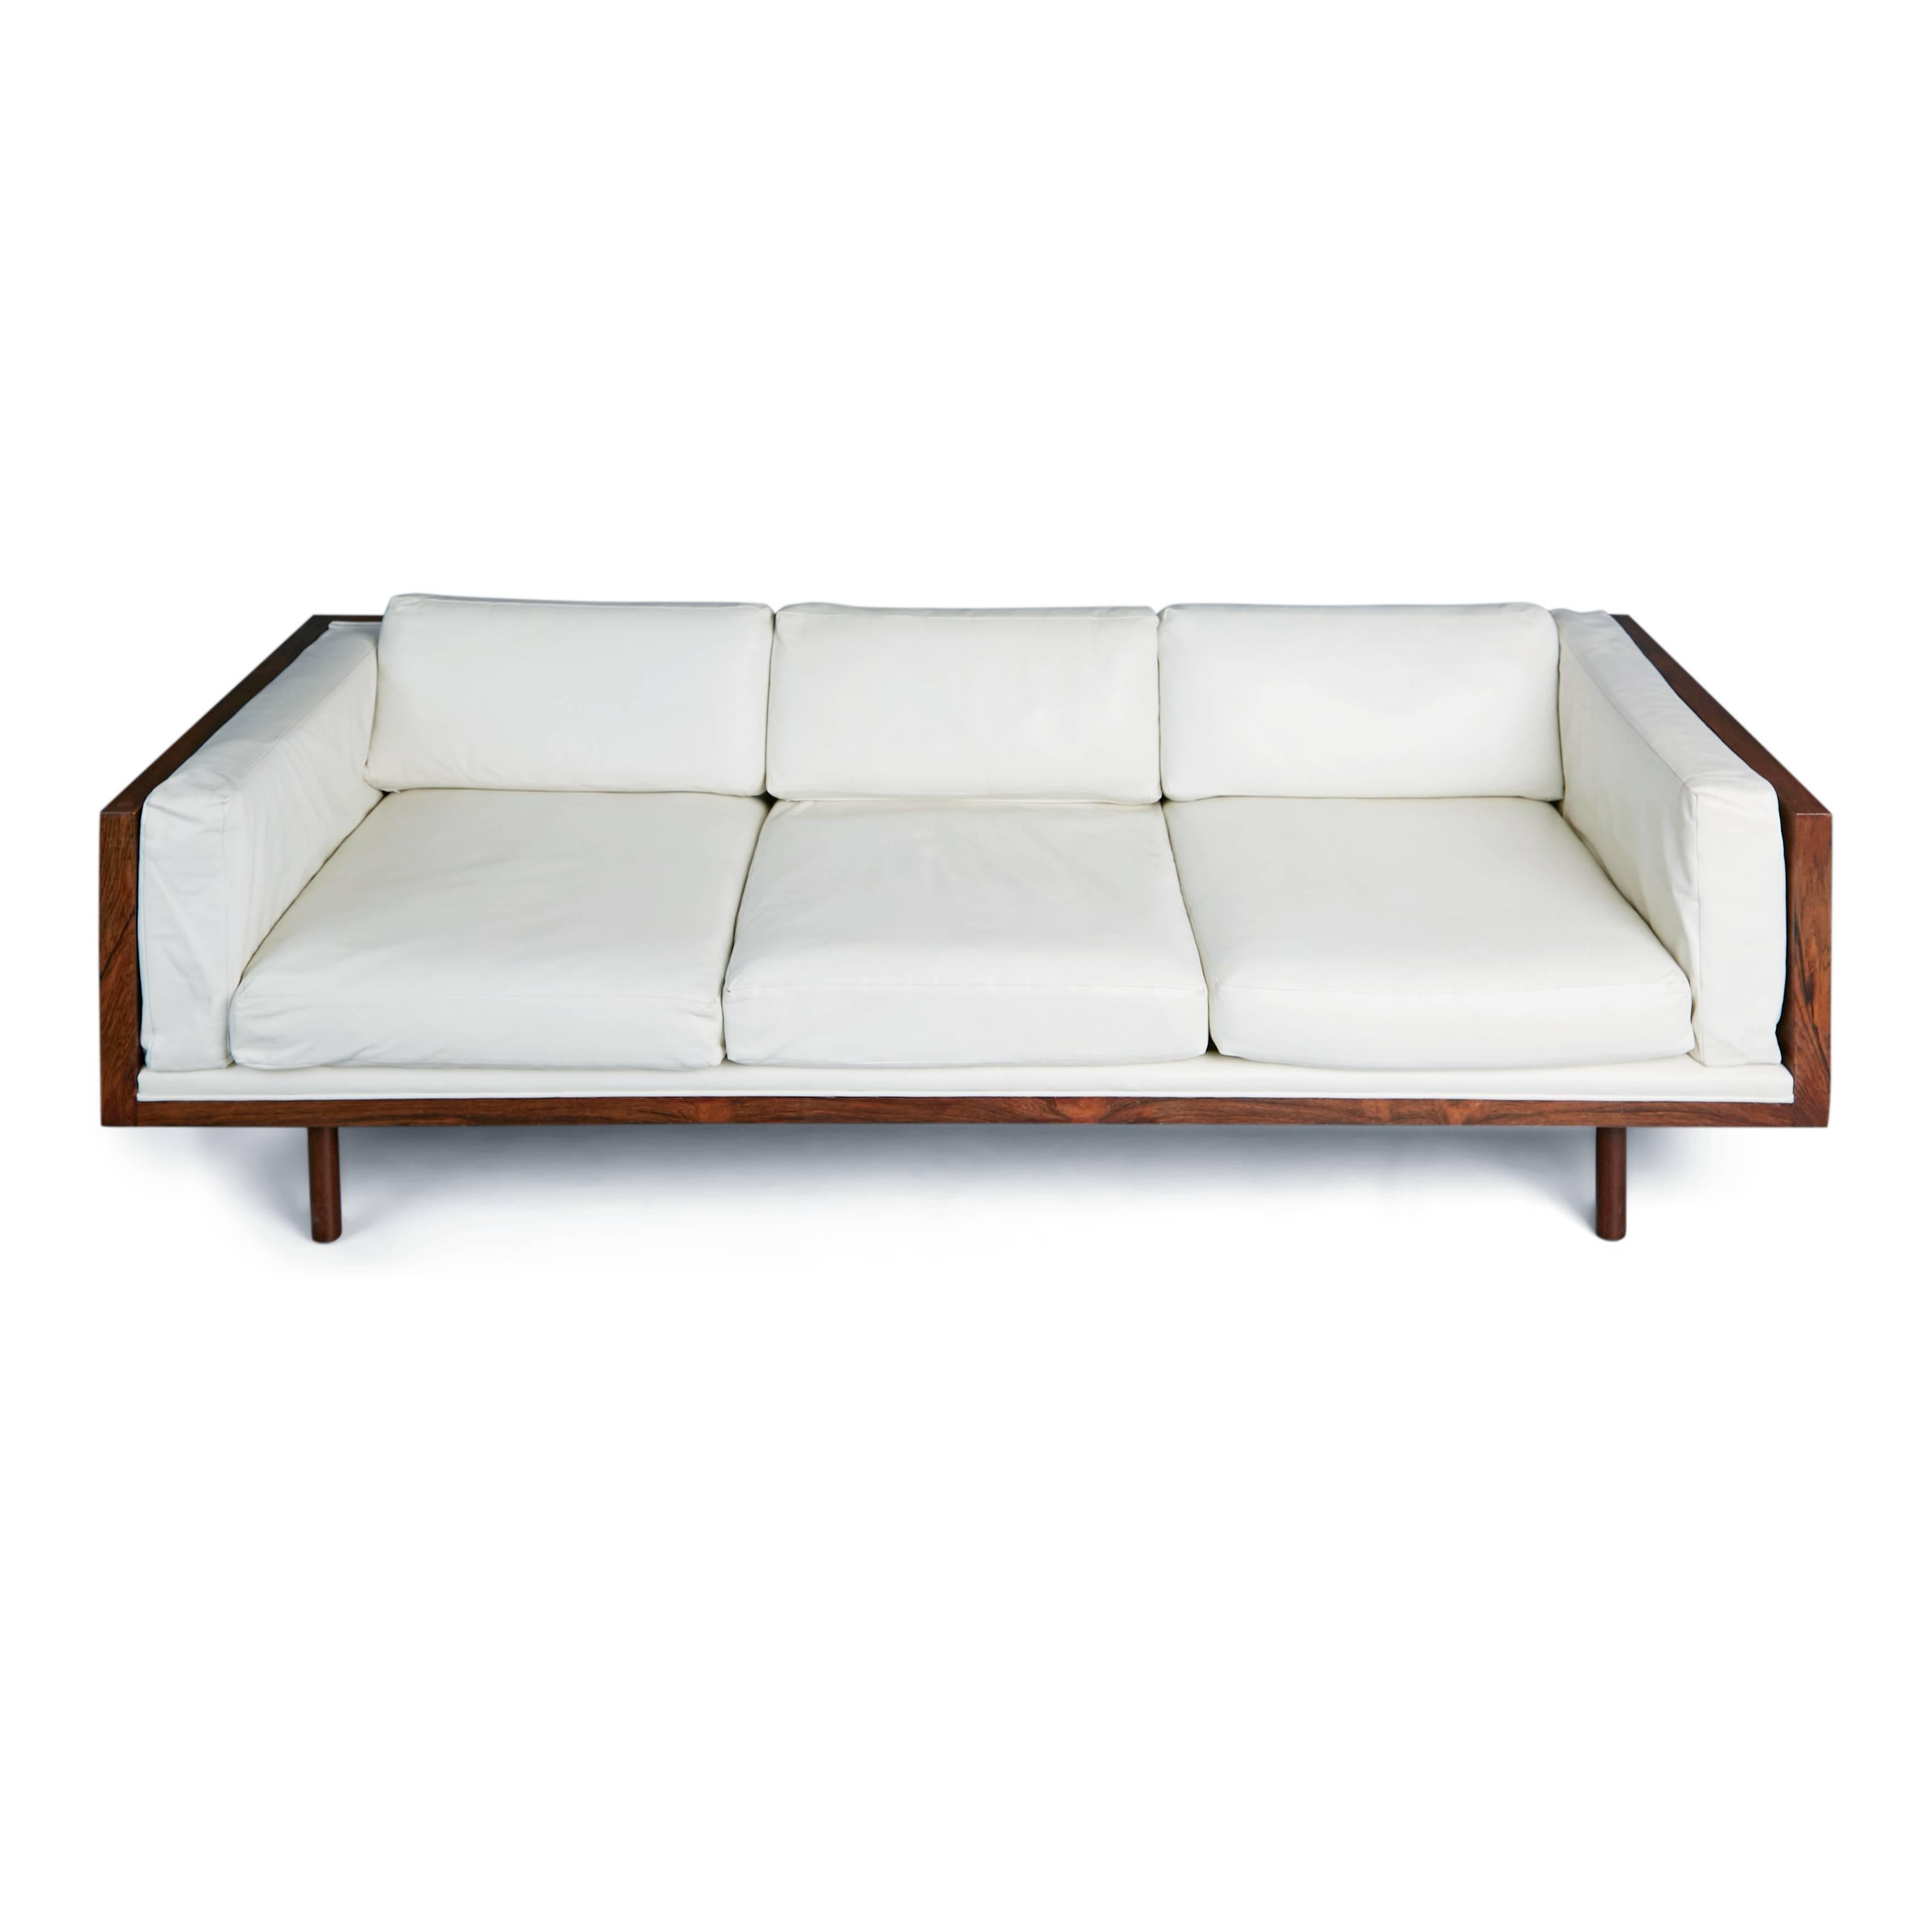 American Rosewood and Leather Case Sofa by Milo Baughman for Thayer Coggin, circa 1960